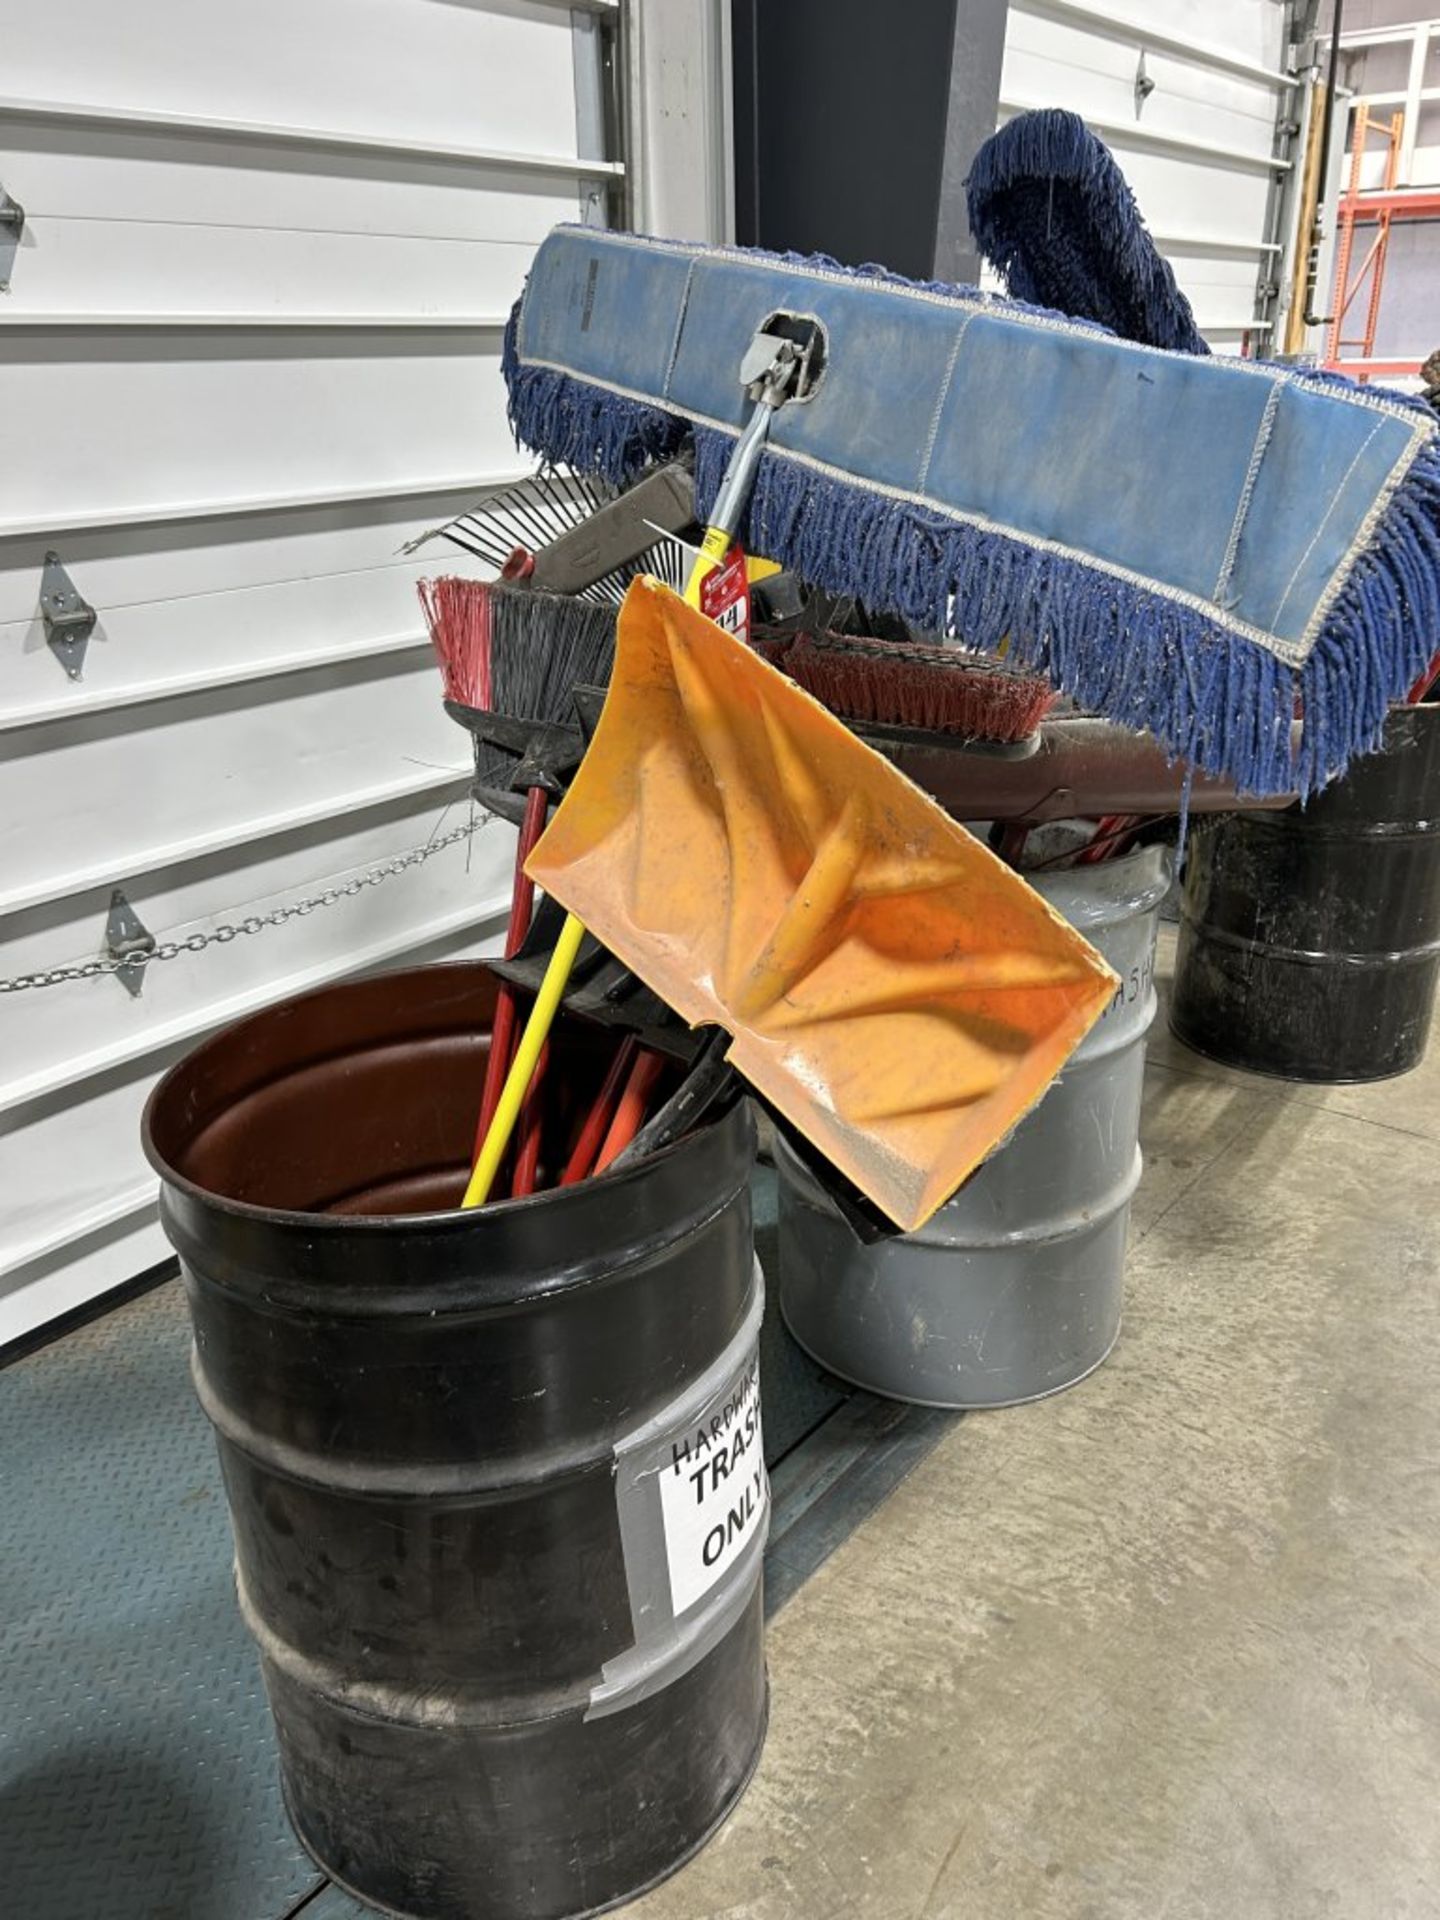 BARREL OF ASSORTED BROOMS, SQUEEGEES, SHOVELS, DUST MOPS, ETC. - Image 2 of 2